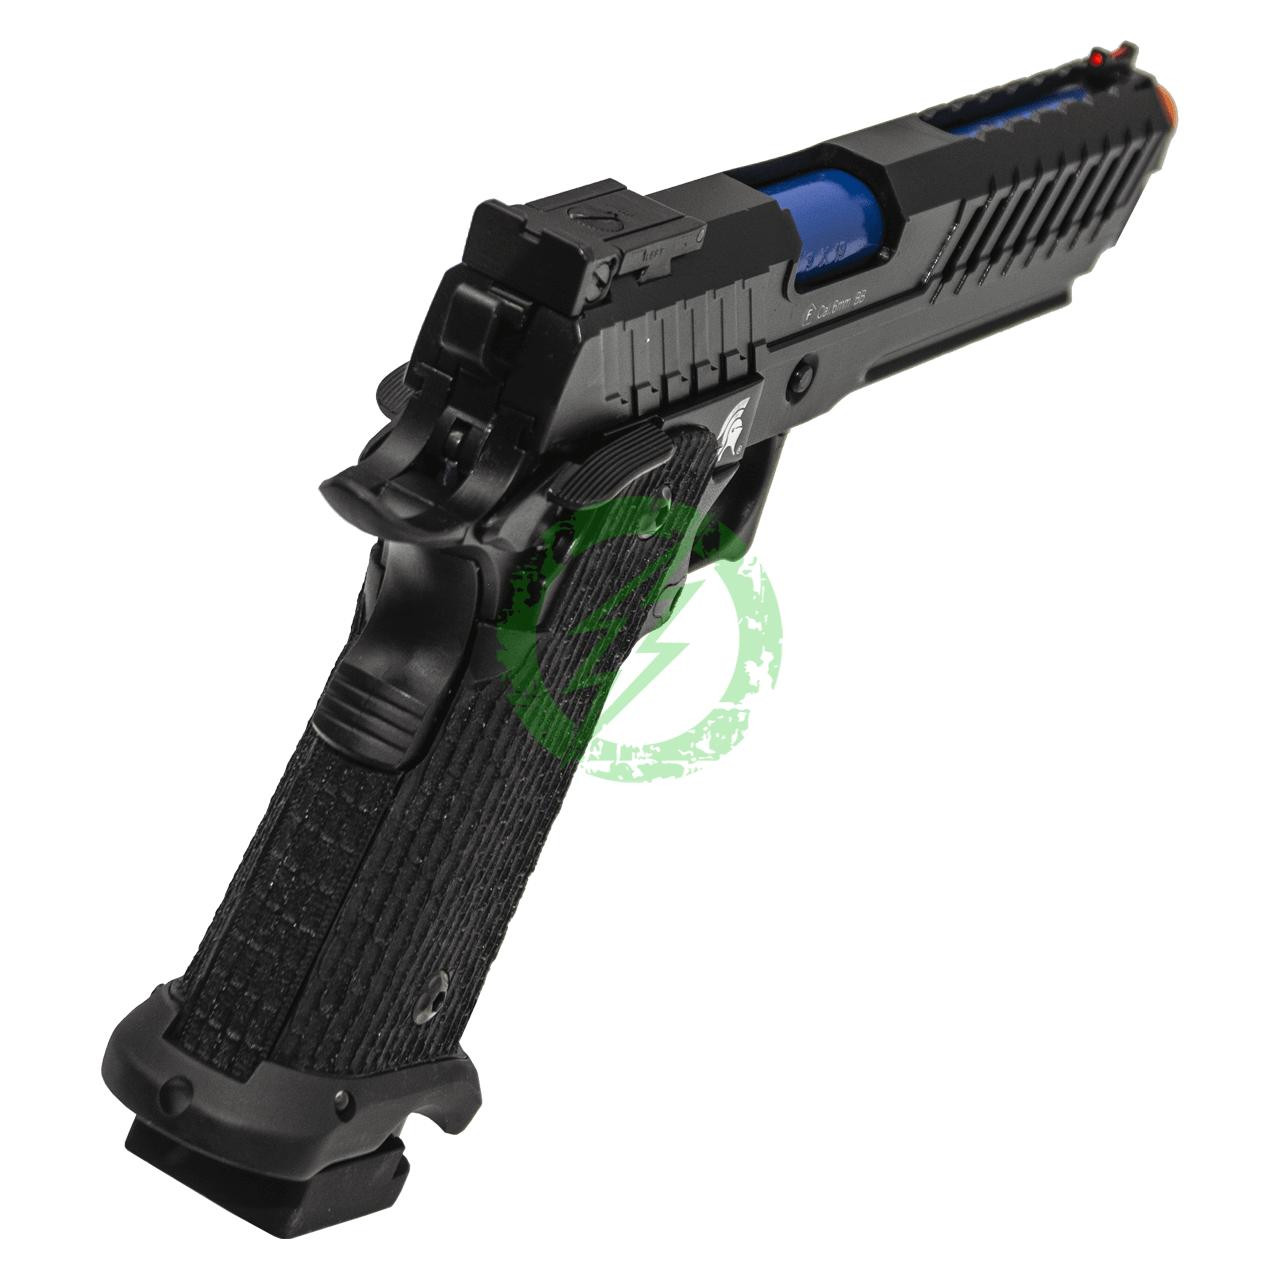  Lancer Tactical KnightShade HiCapa GBB Airsoft Pistol 